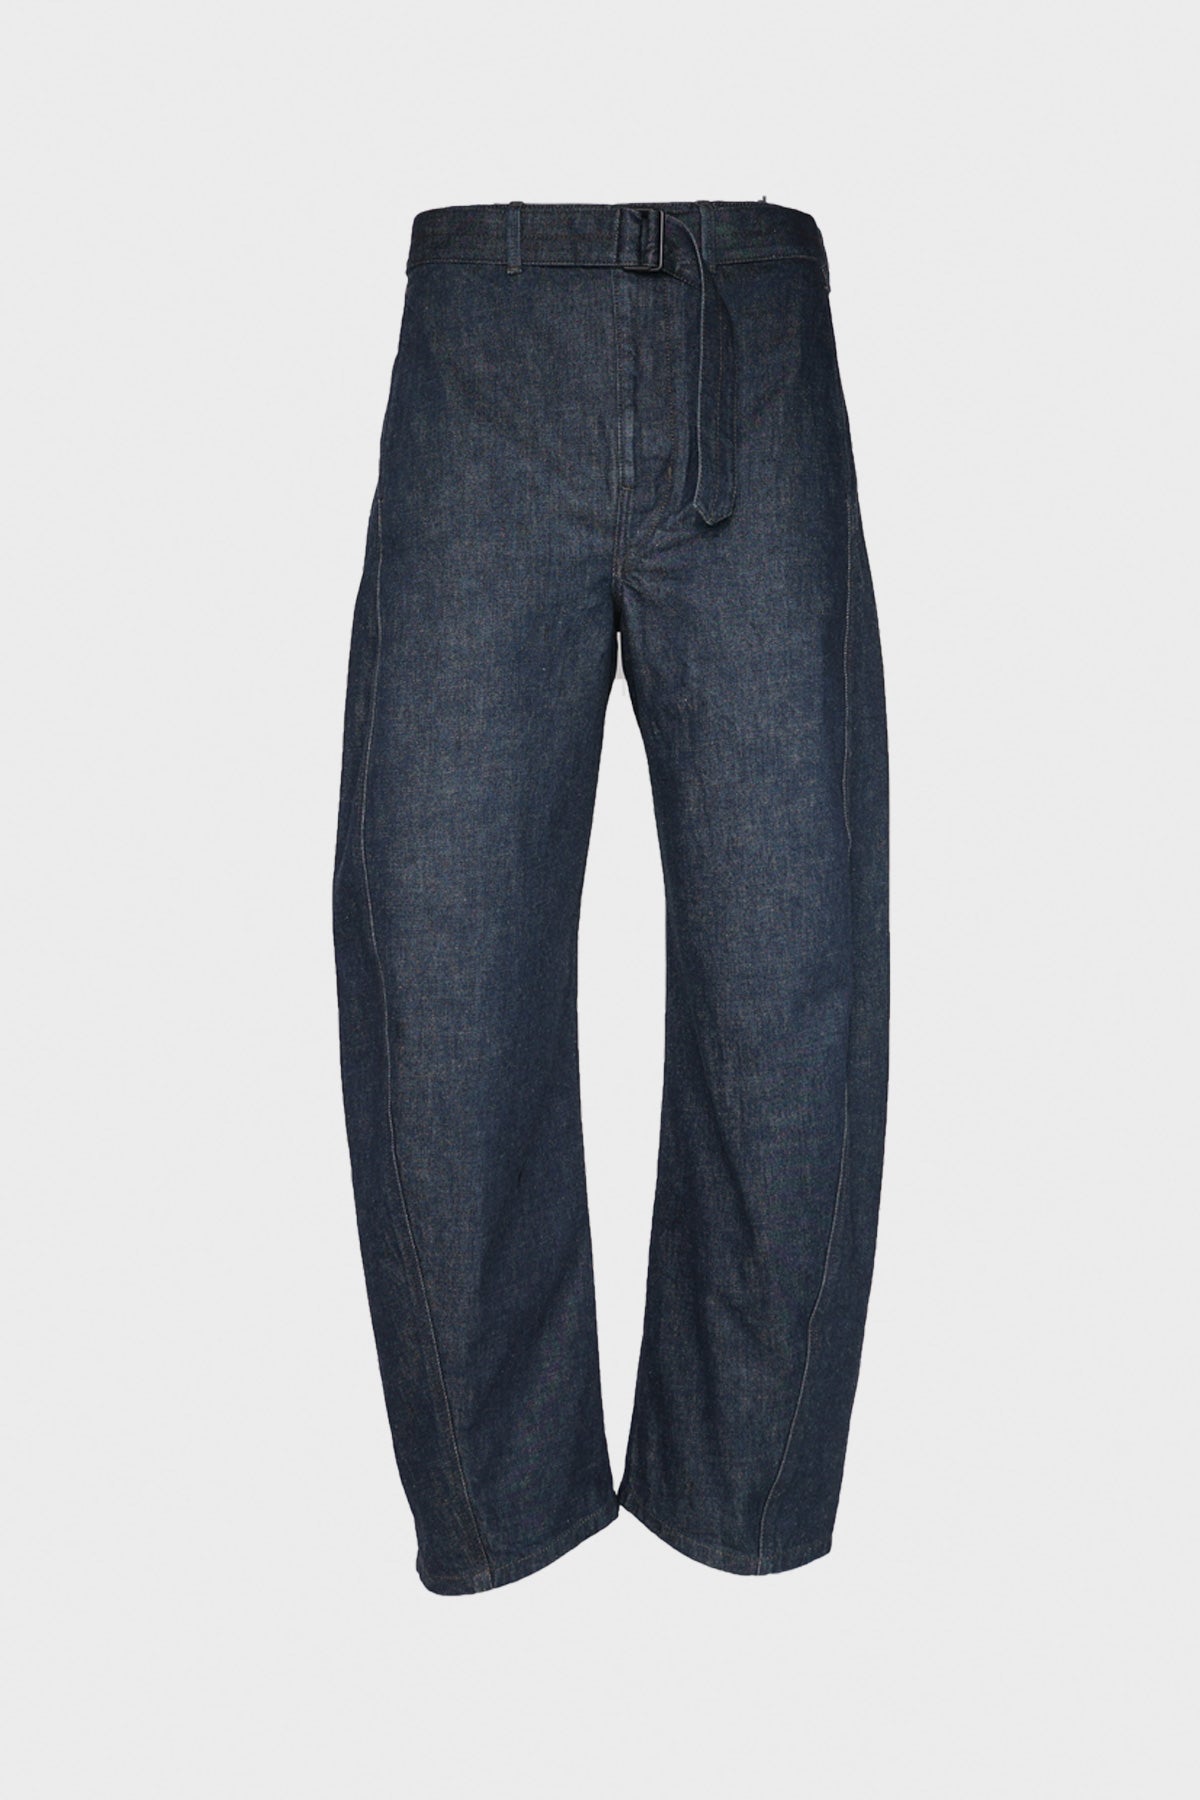 Espresso Twisted Belted Pants in Garment Dyed Denim